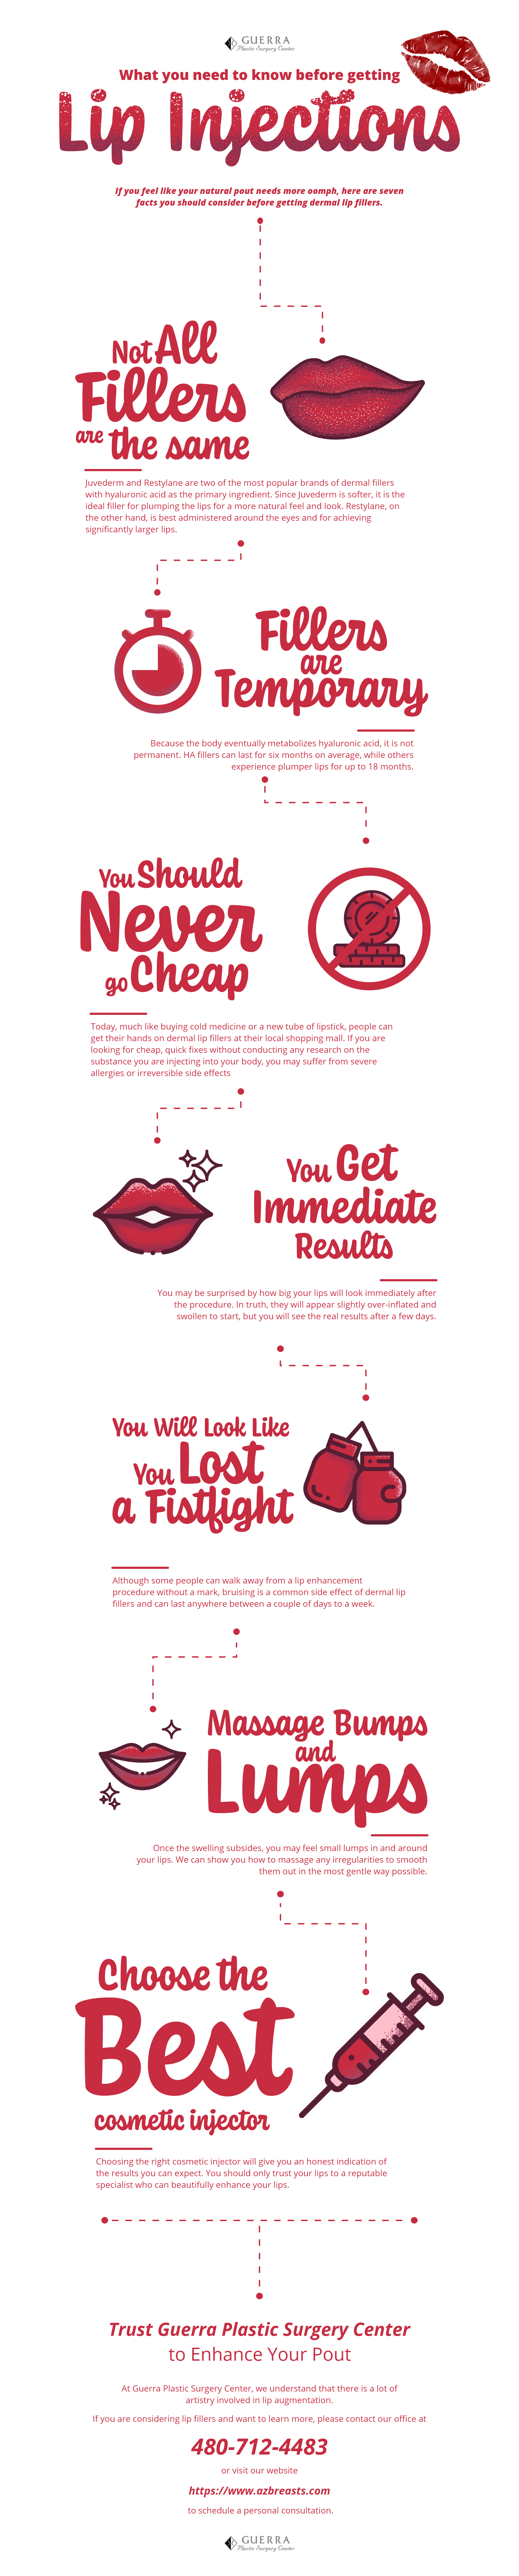 Lip-Injections-infographic-plaza